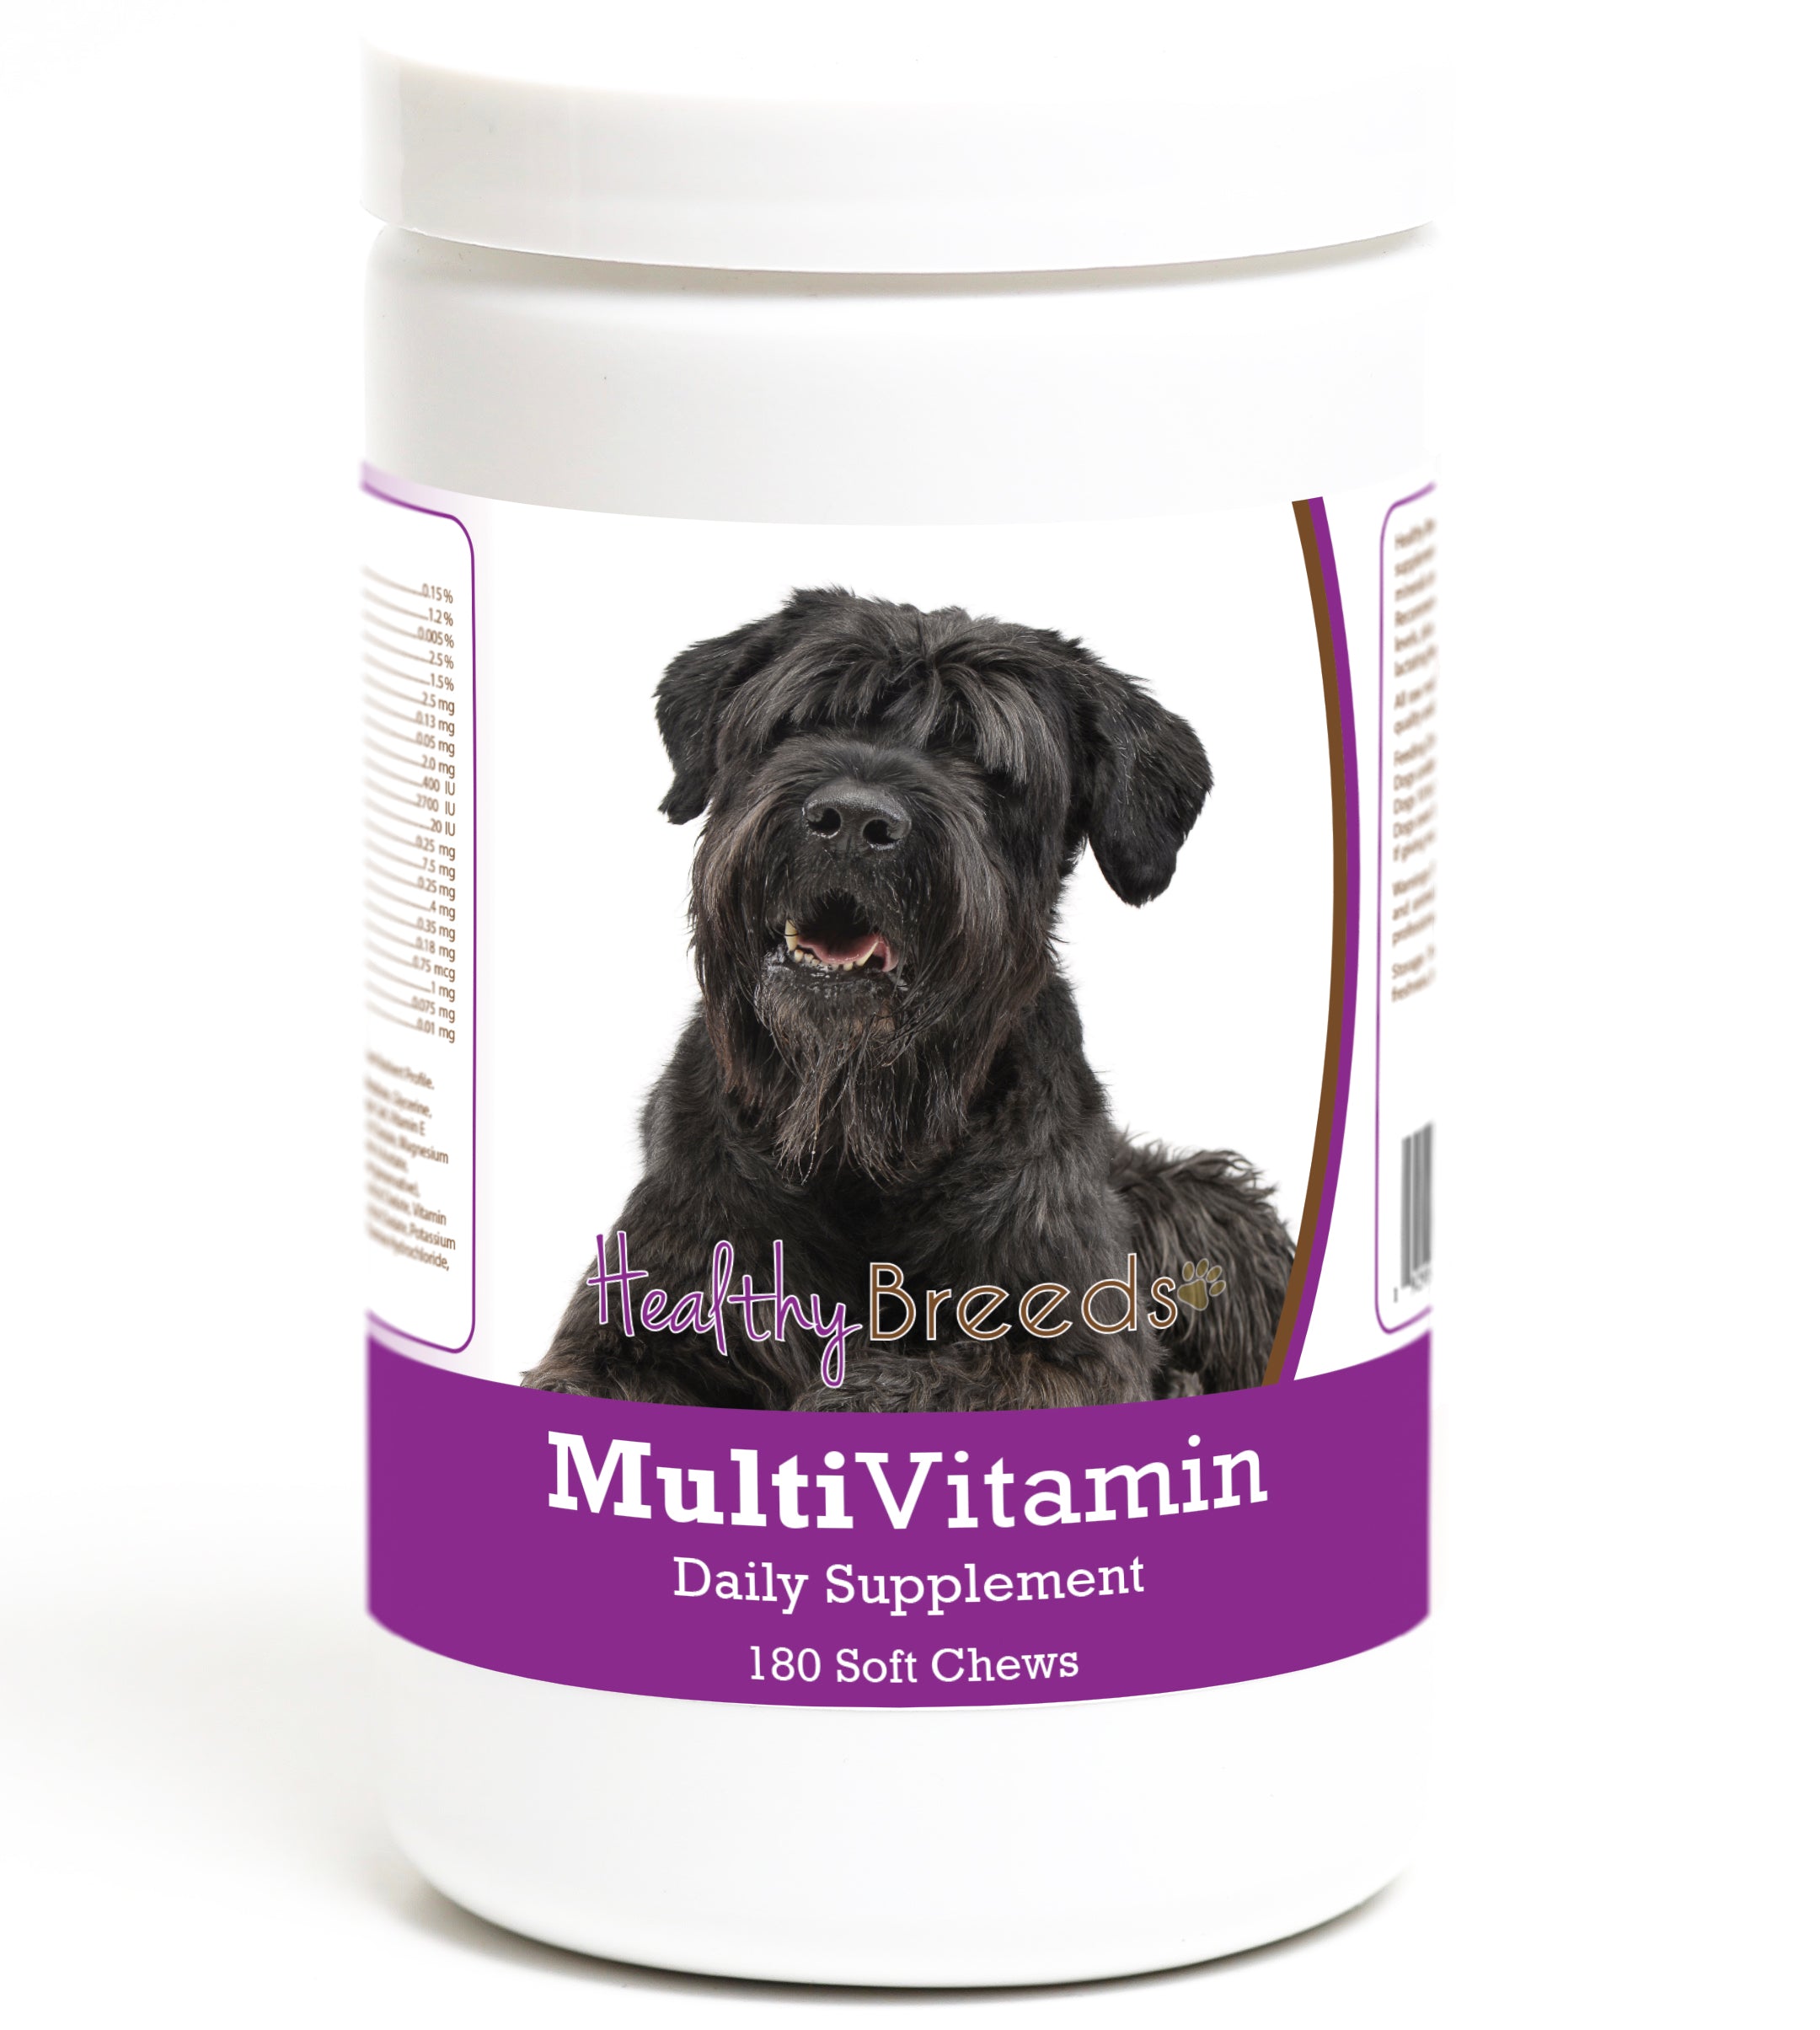 Black Russian Terrier Multivitamin Soft Chew for Dogs 180 Count